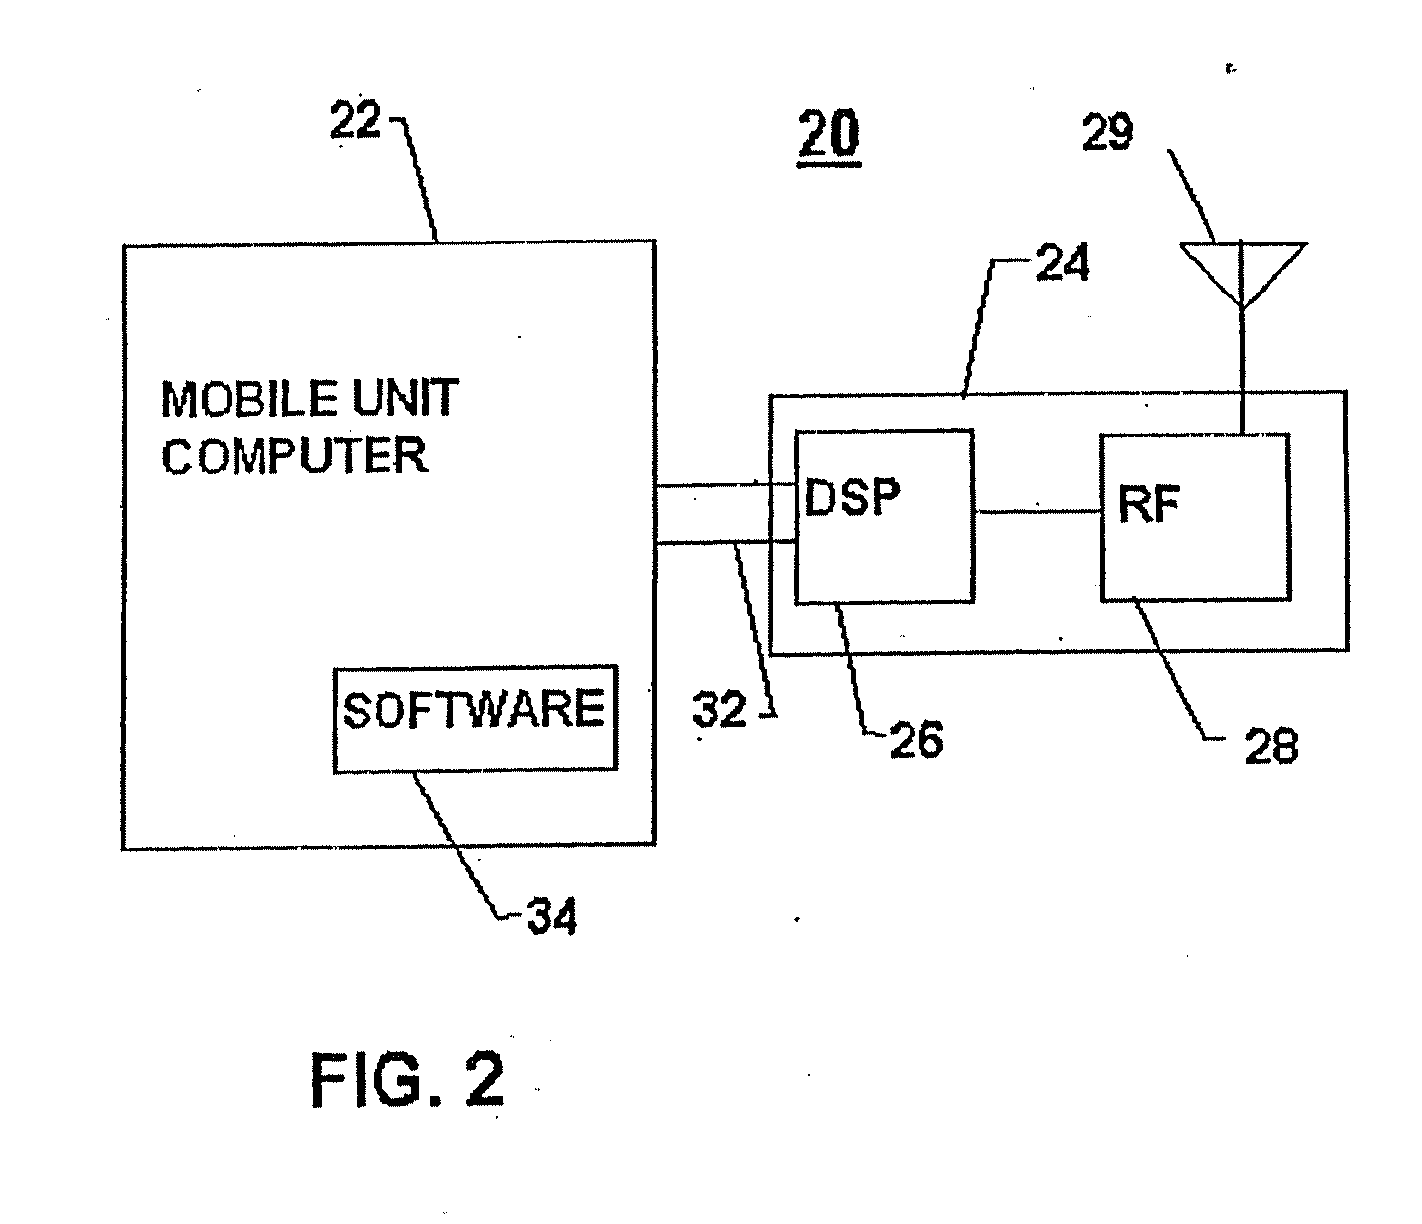 Cell controller adapted to perform a management function